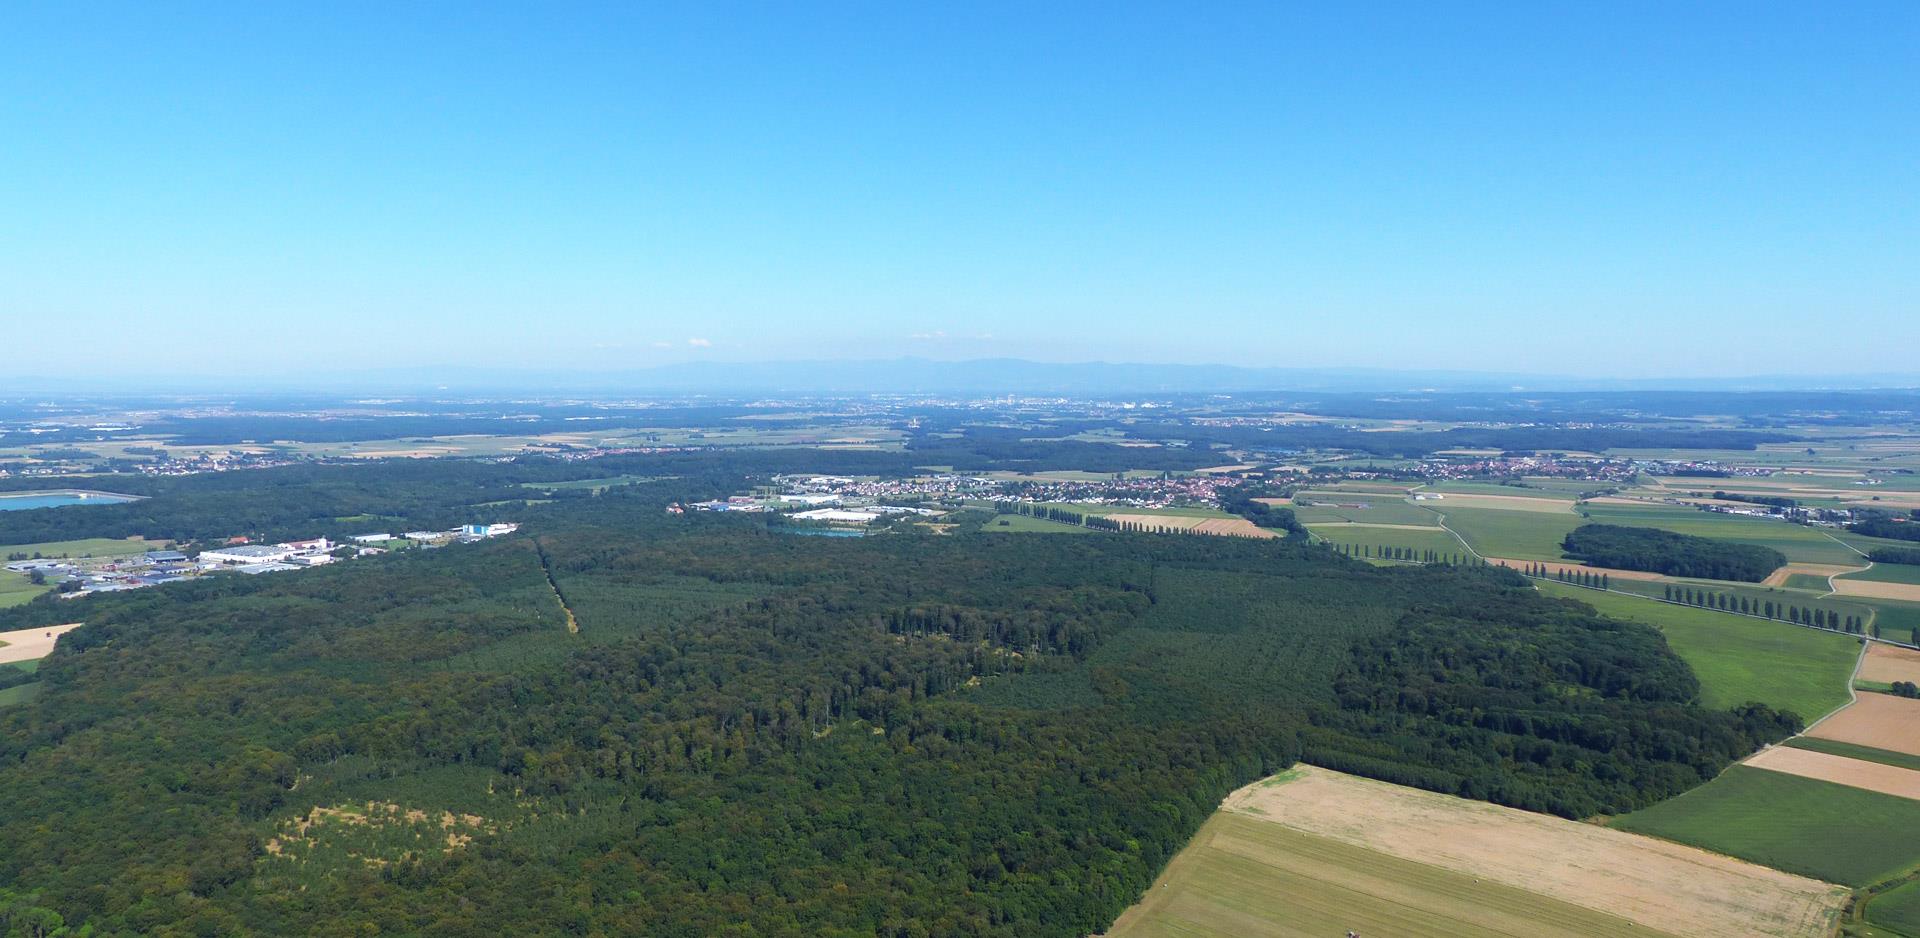 Bird’s eye view of the surroundings of the campsite Les Castors located at the foothills of the Vosges Mountains